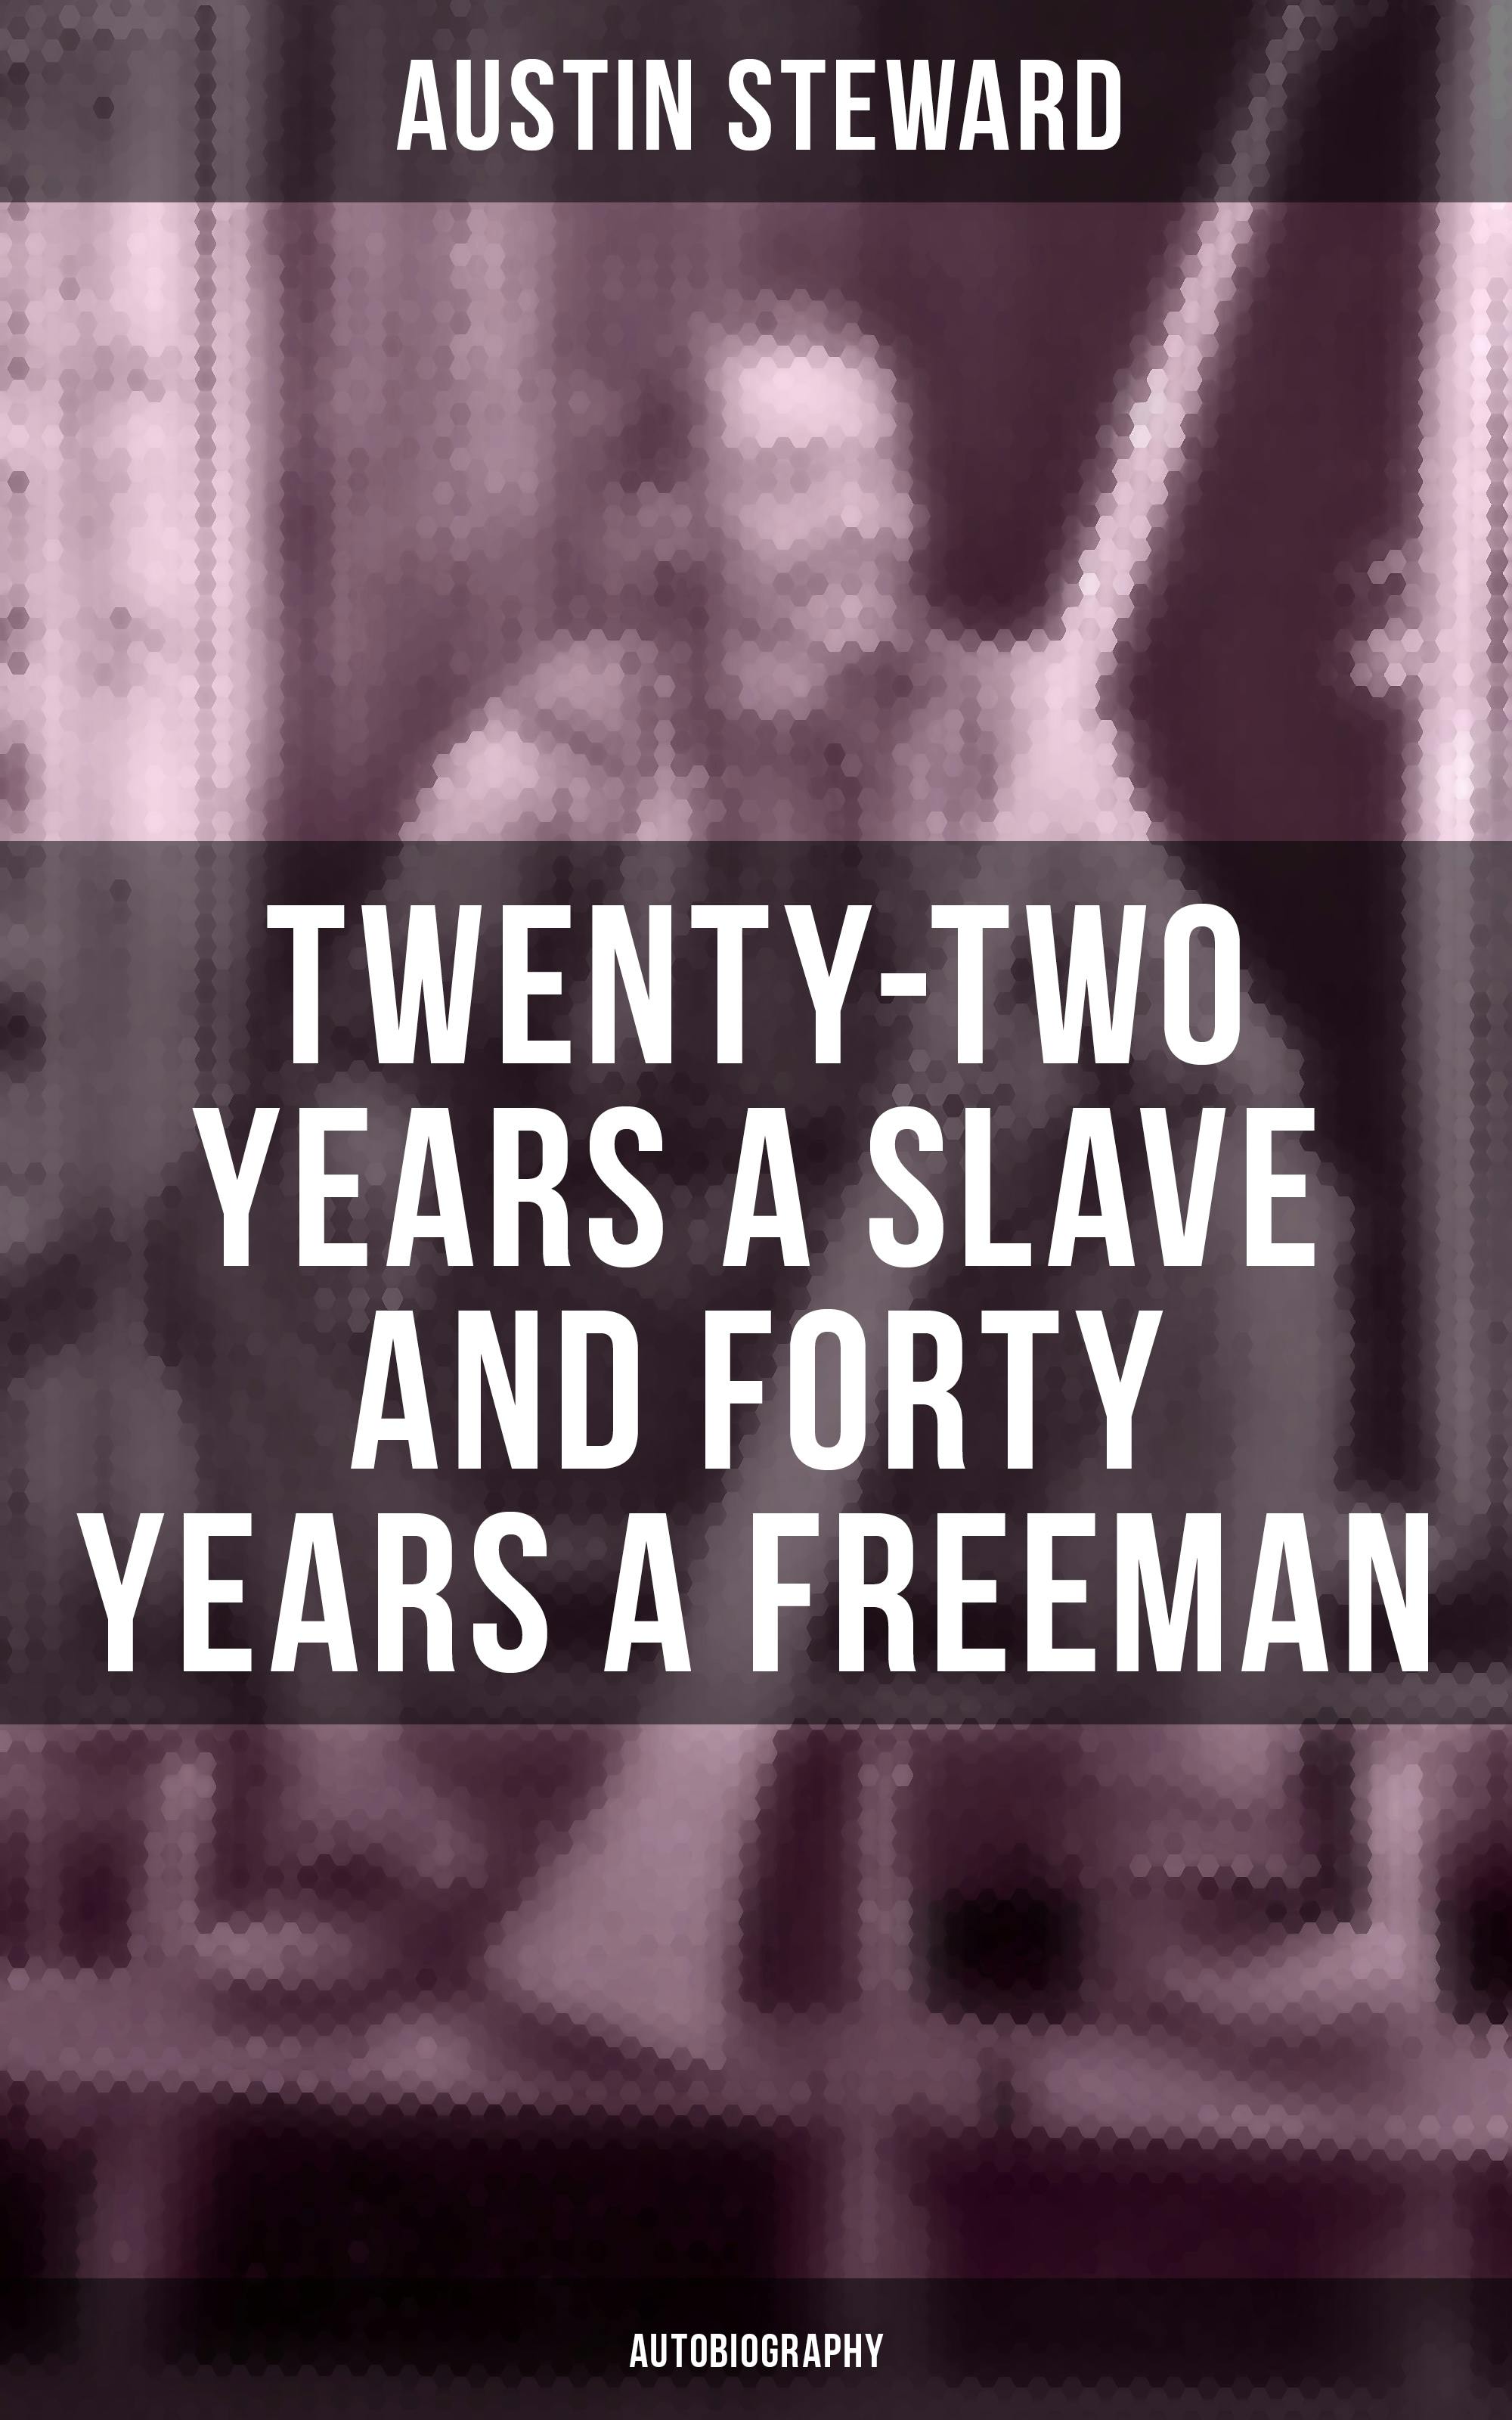 Twenty-Two Years a Slave and Forty Years a Freeman (Autobiography) - Austin Steward